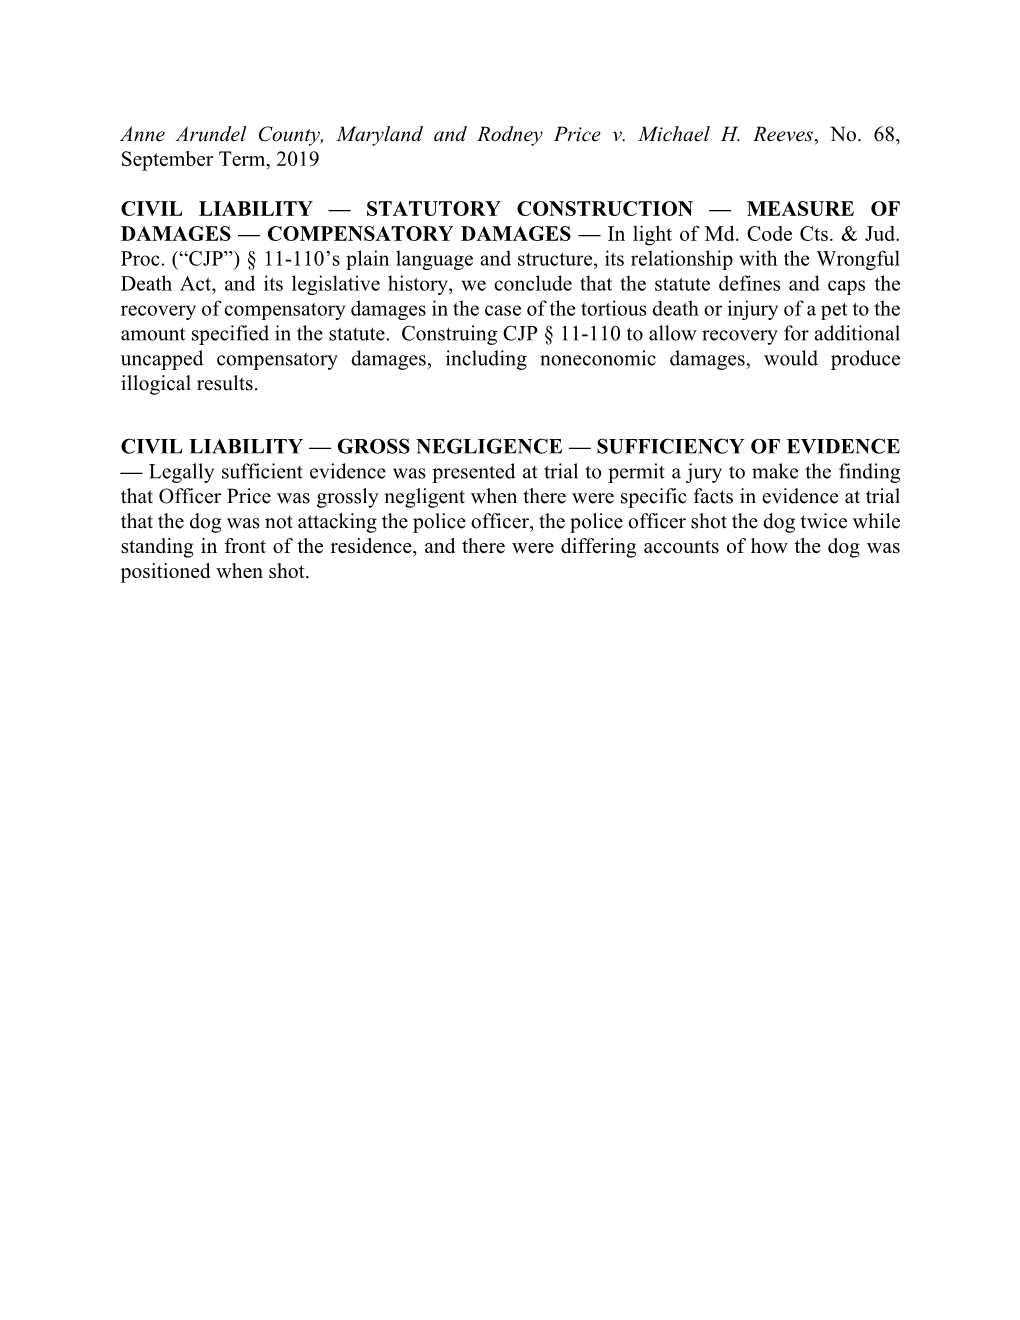 Anne Arundel County, Maryland and Rodney Price V. Michael H. Reeves, No. 68, September Term, 2019 CIVIL LIABILITY — STATUTORY